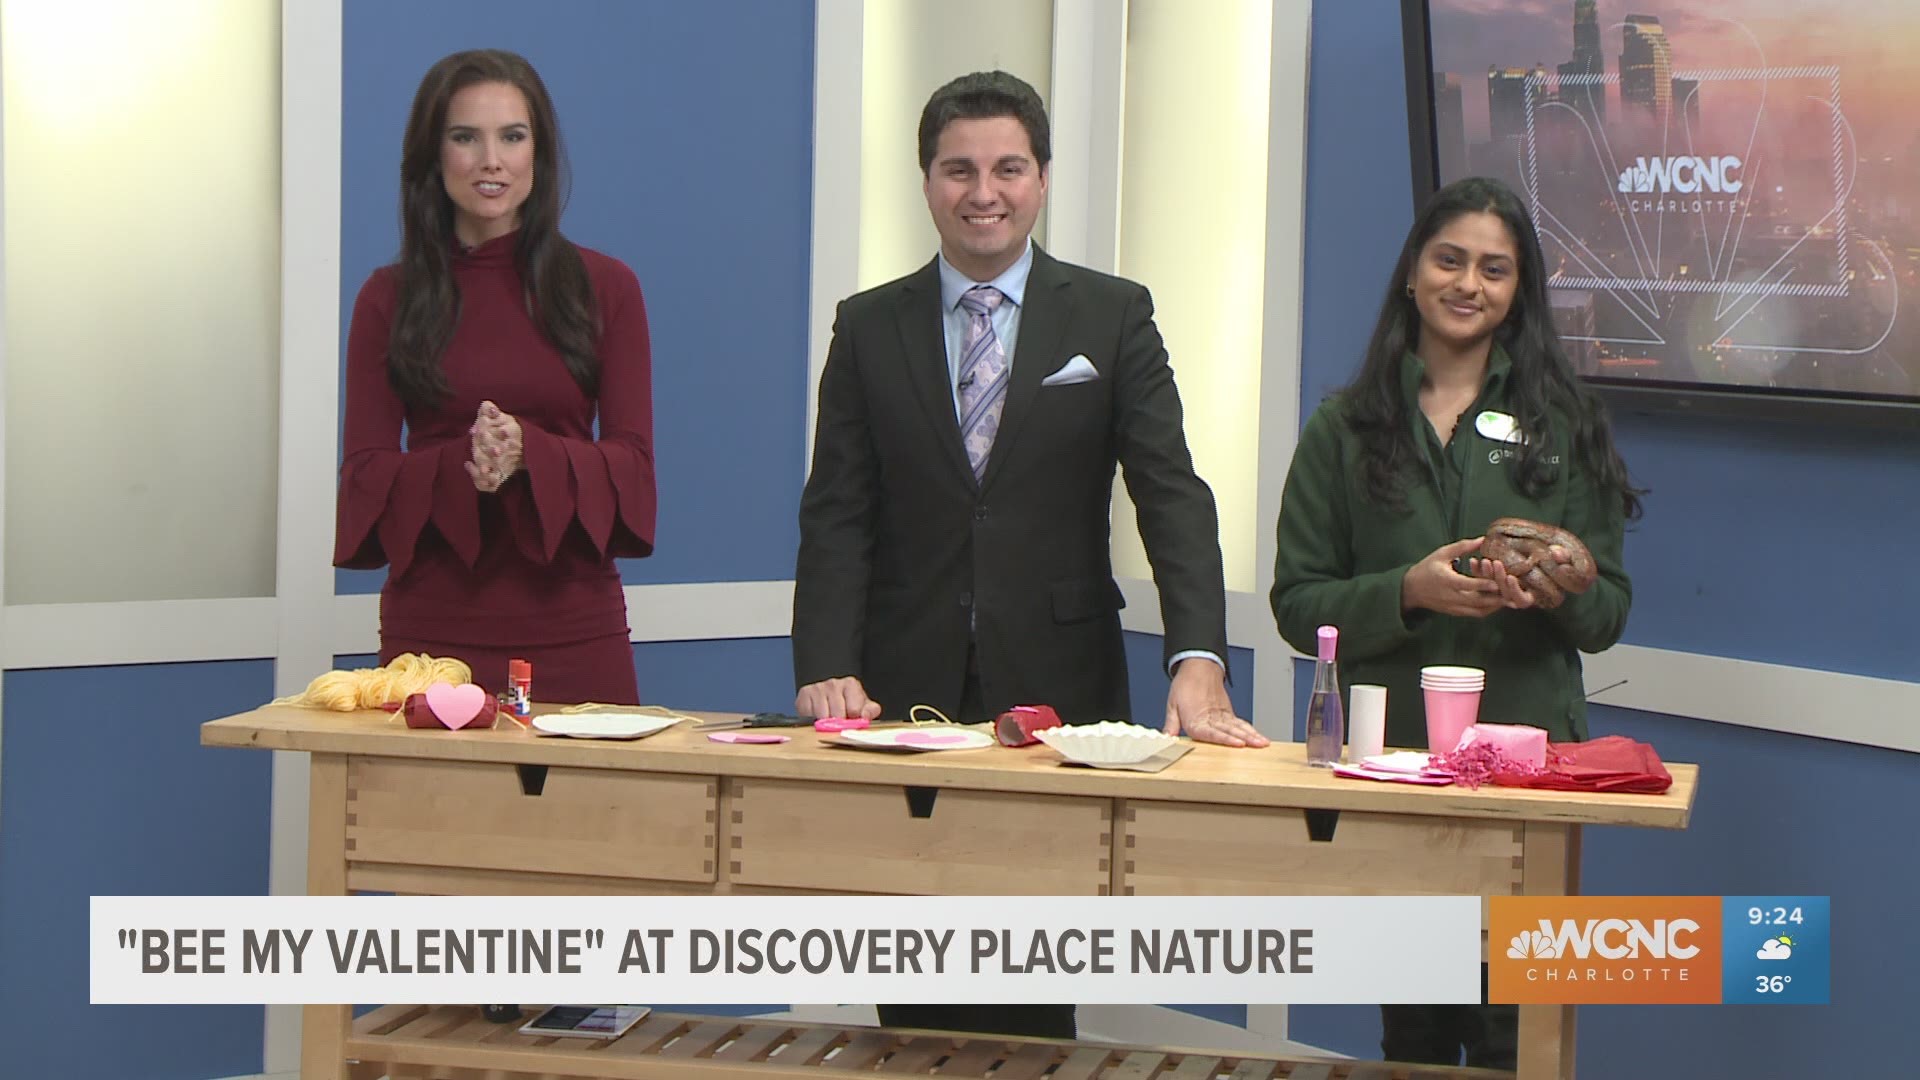 Show your love for the resident animals of Discovery Place Nature by creating enrichment valentines for them.